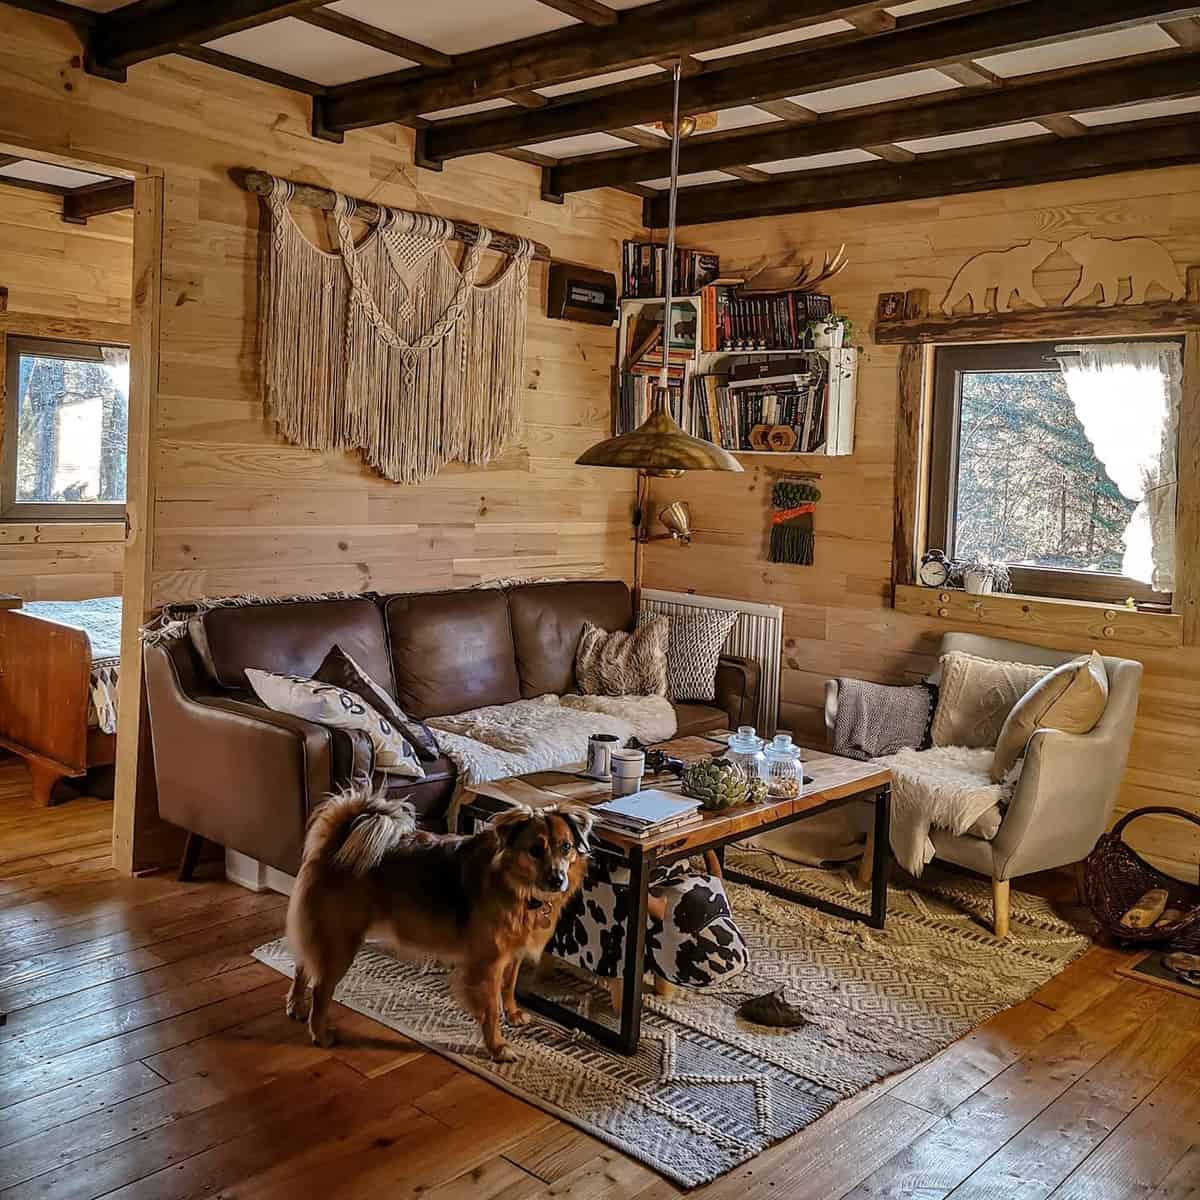 Wooden hut, small living room, brown sofa, dog